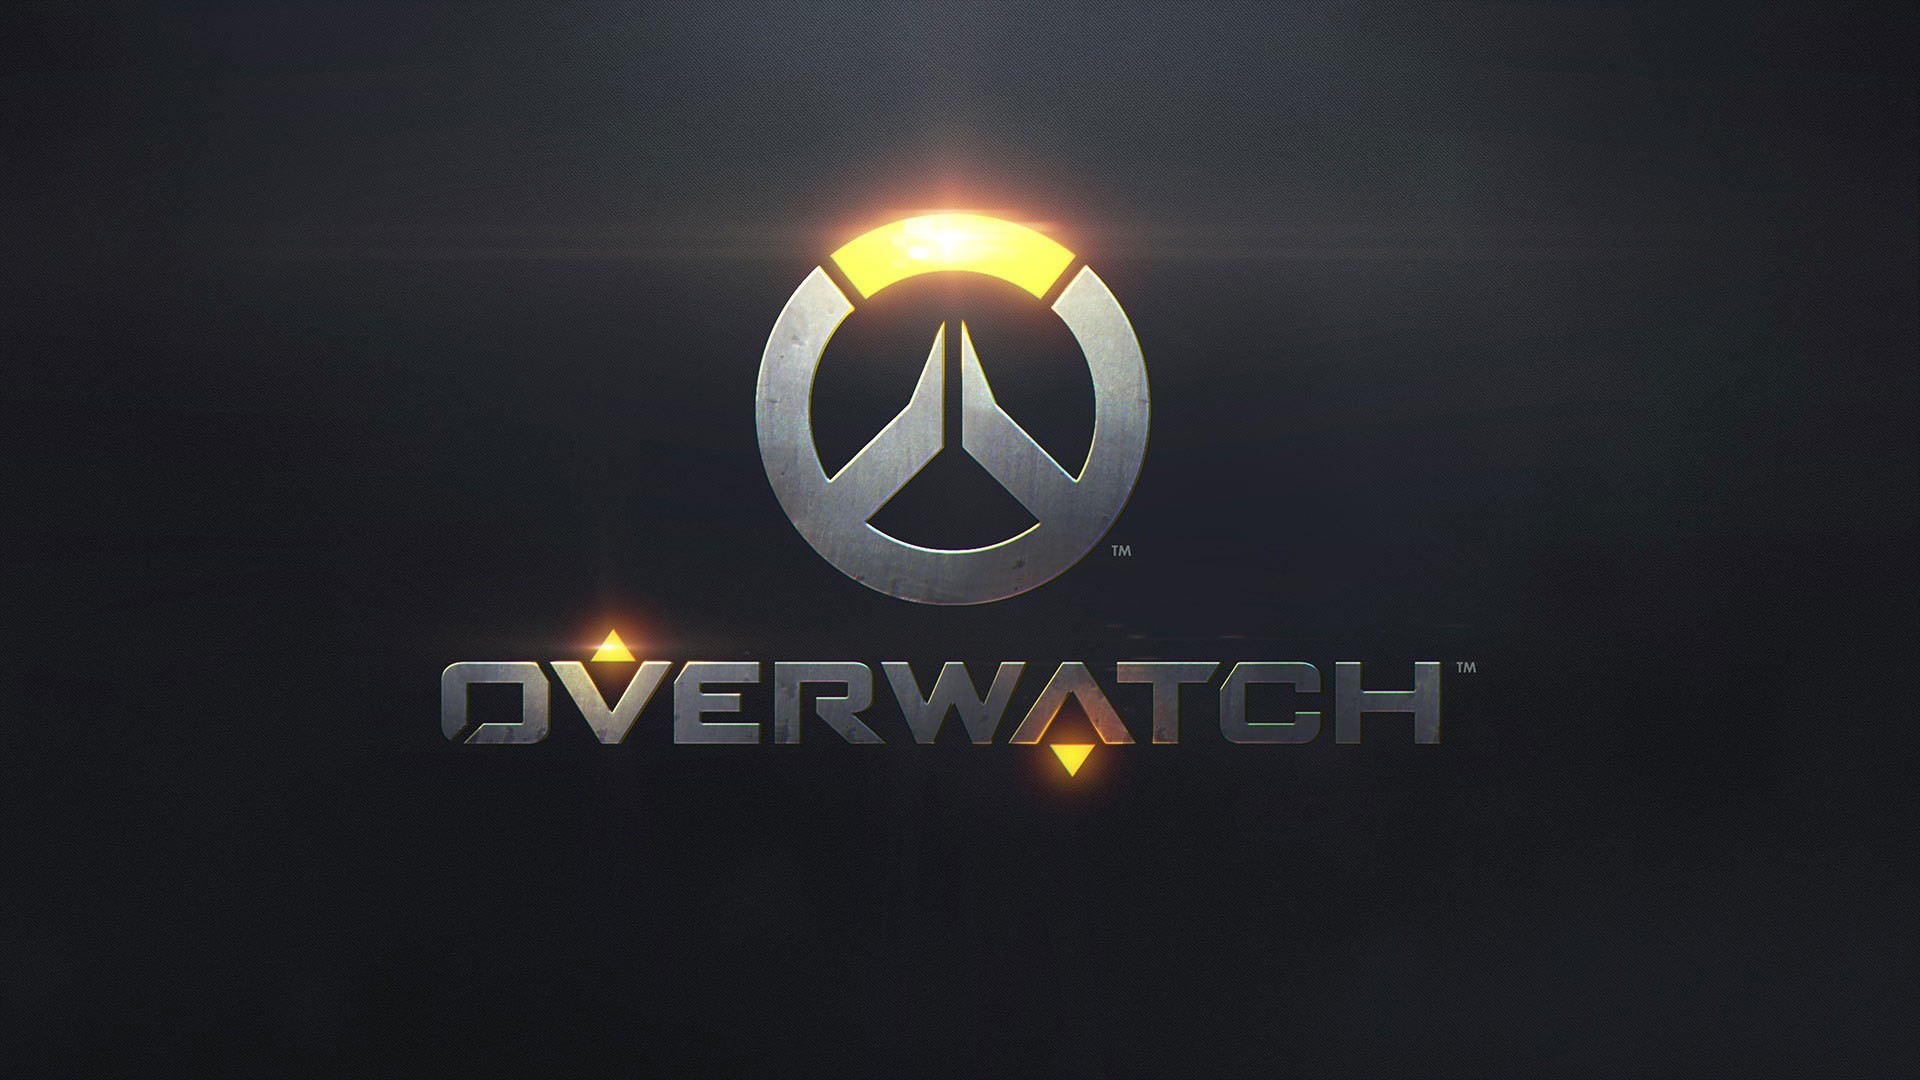 General 1920x1080 Overwatch PC gaming logo simple background